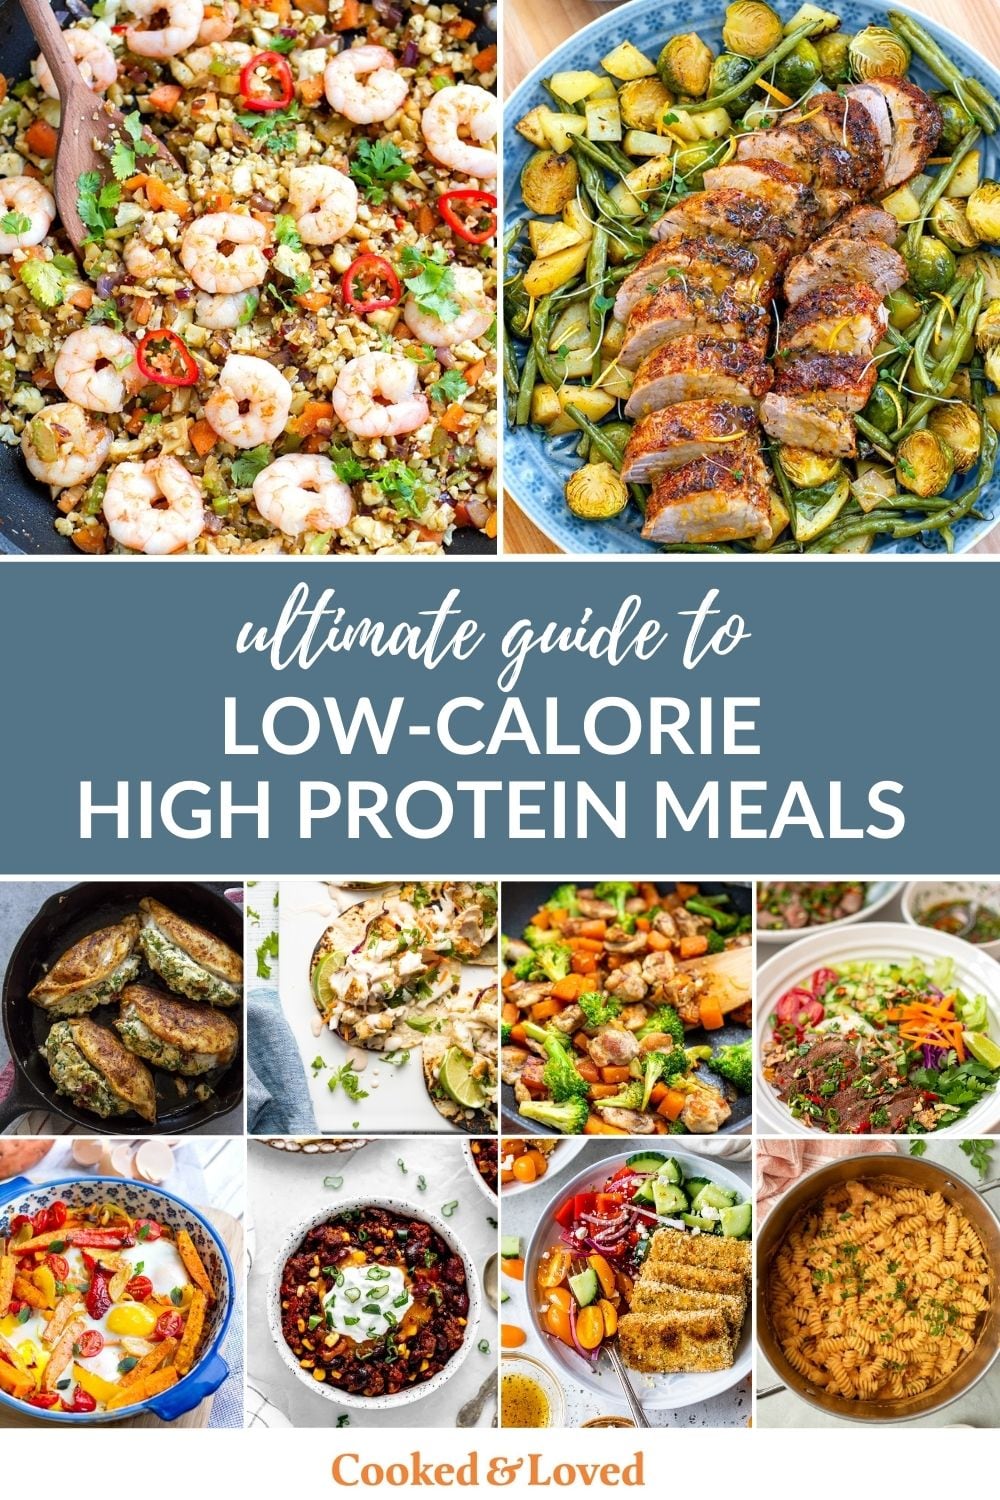 33 Low-Calorie High Protein Meals